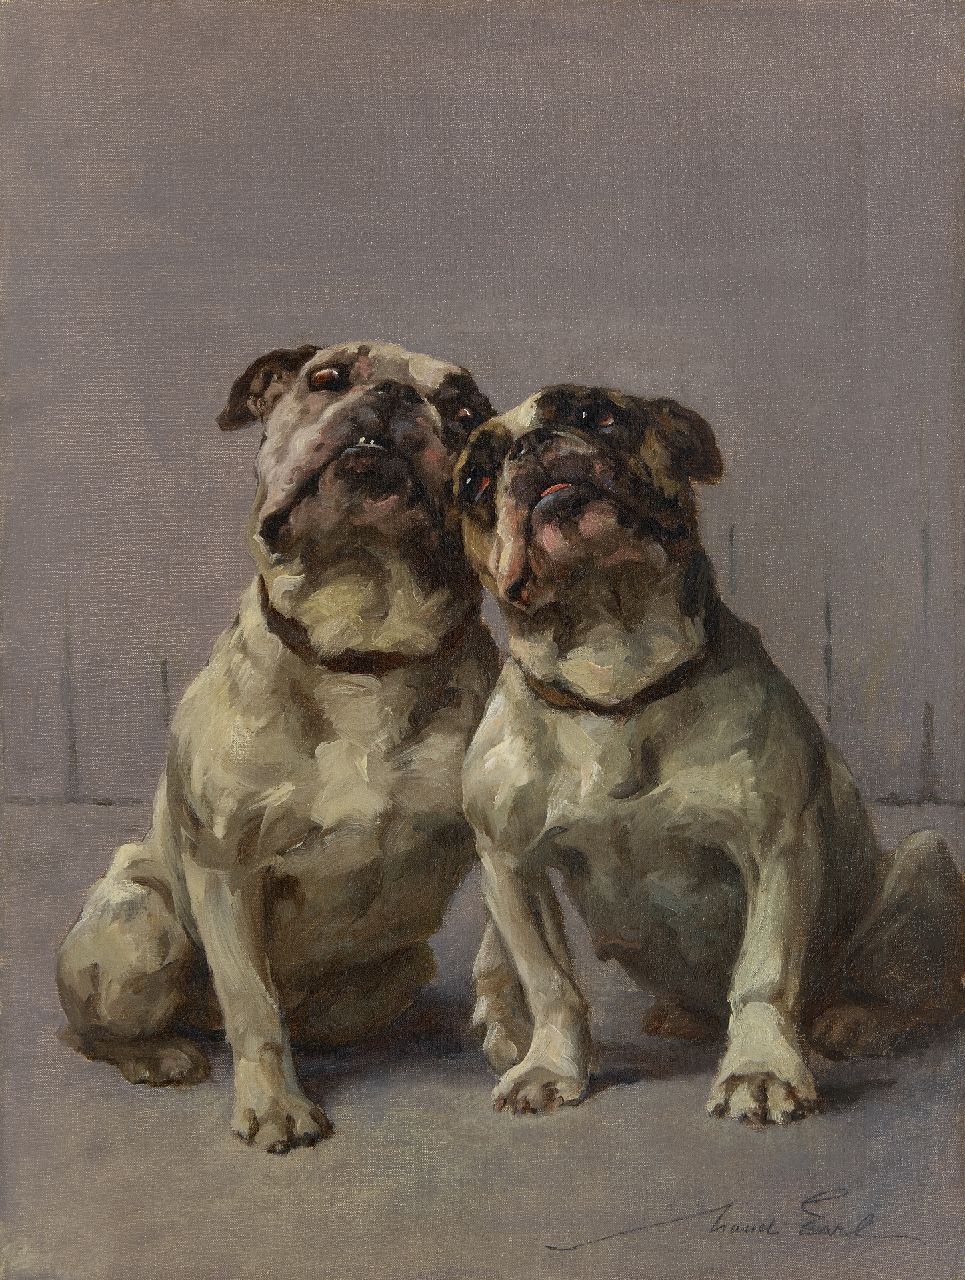 Earl M.A.  | 'Maud' Alice Earl | Paintings offered for sale | Bulldog buddies, oil on canvas 61.5 x 45.9 cm, signed l.r.